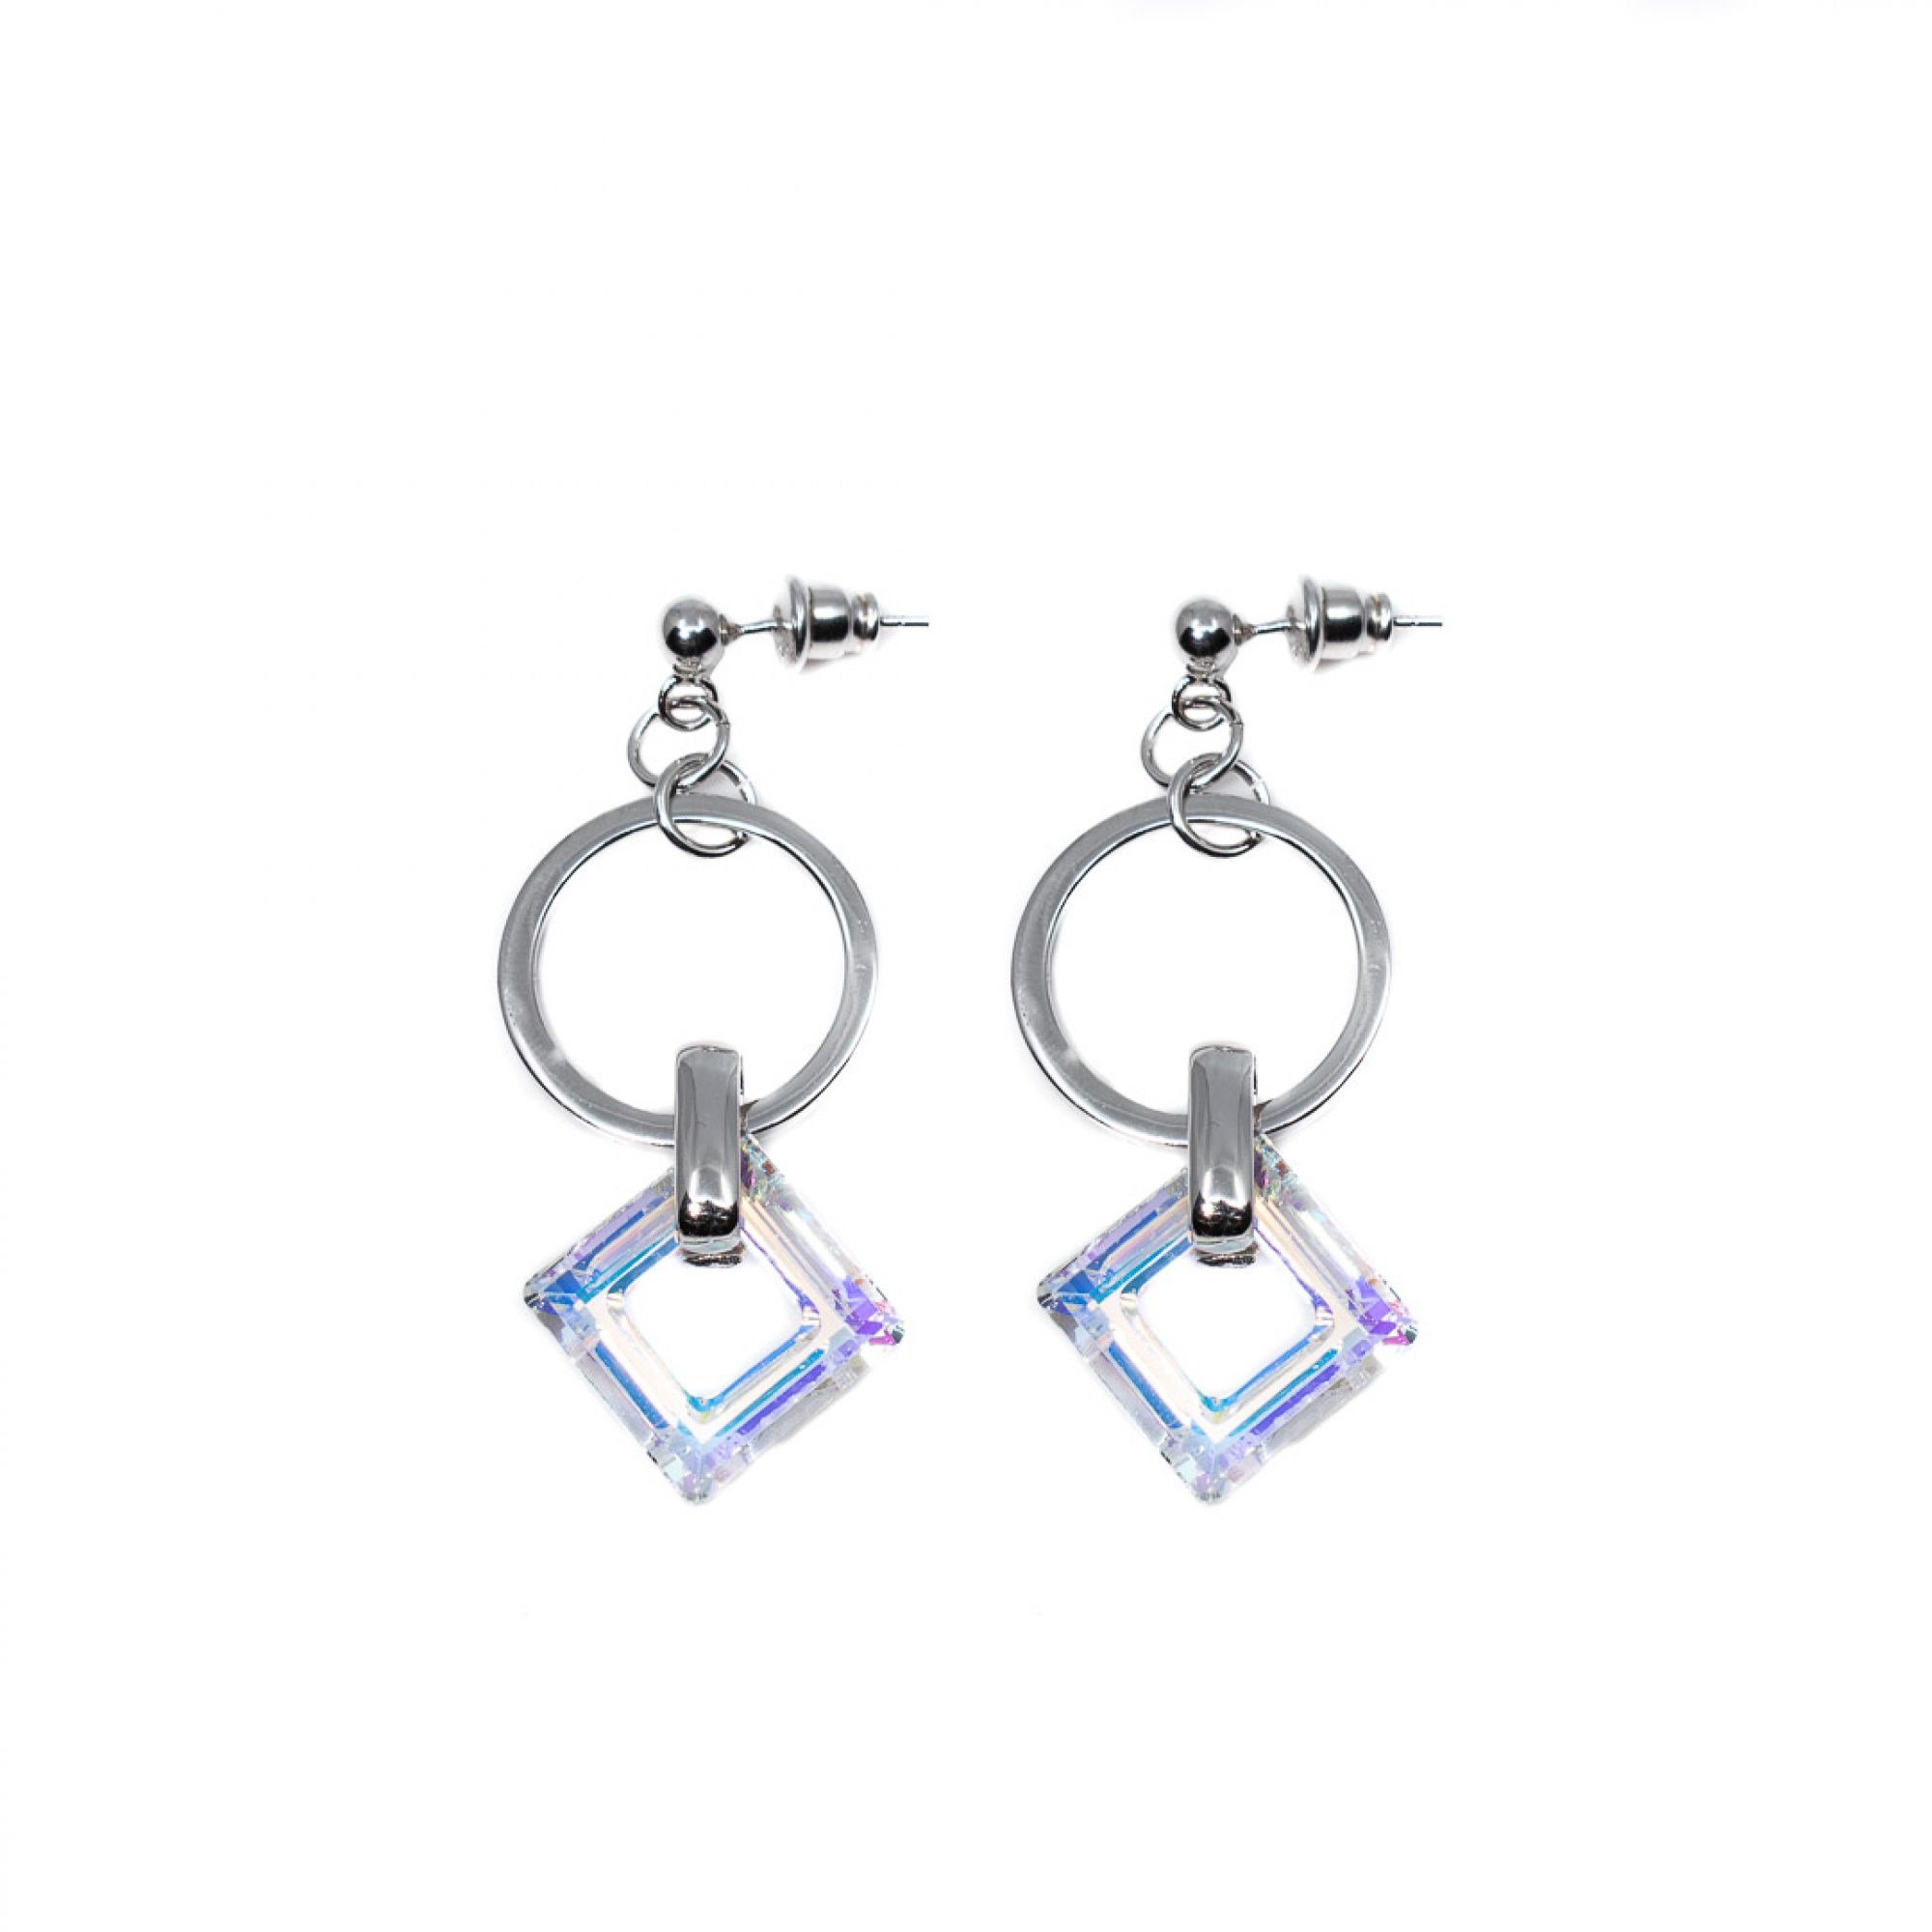 Silver dangle earrings with natural stones